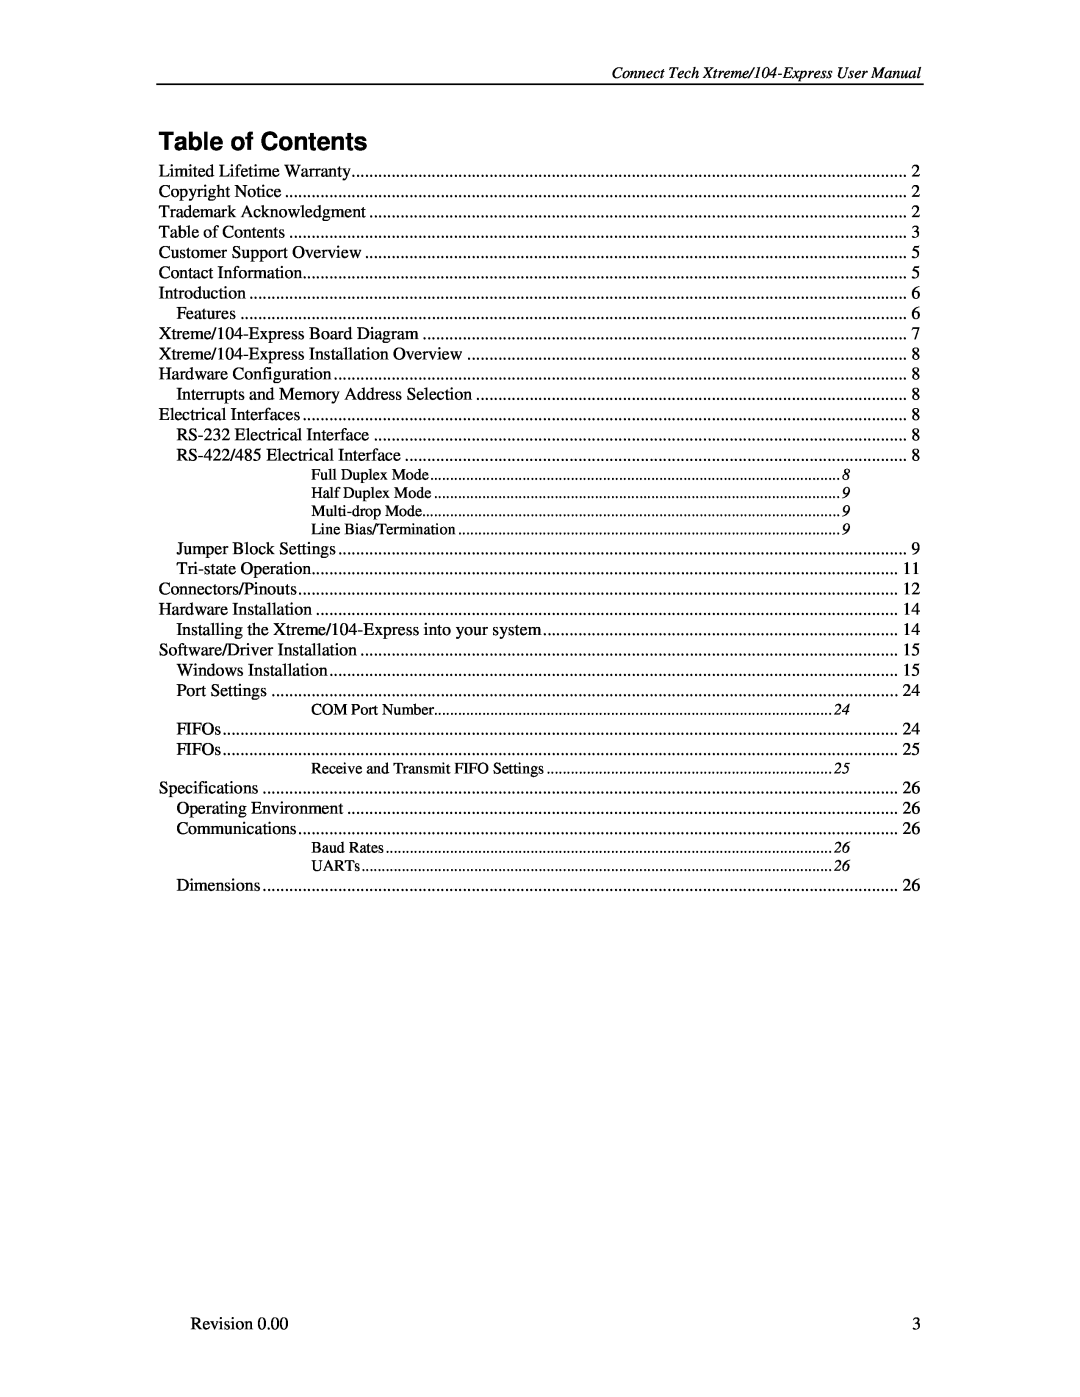 Connect Tech user manual Table of Contents, Connect Tech Xtreme/104-Express User Manual, FIFOs 